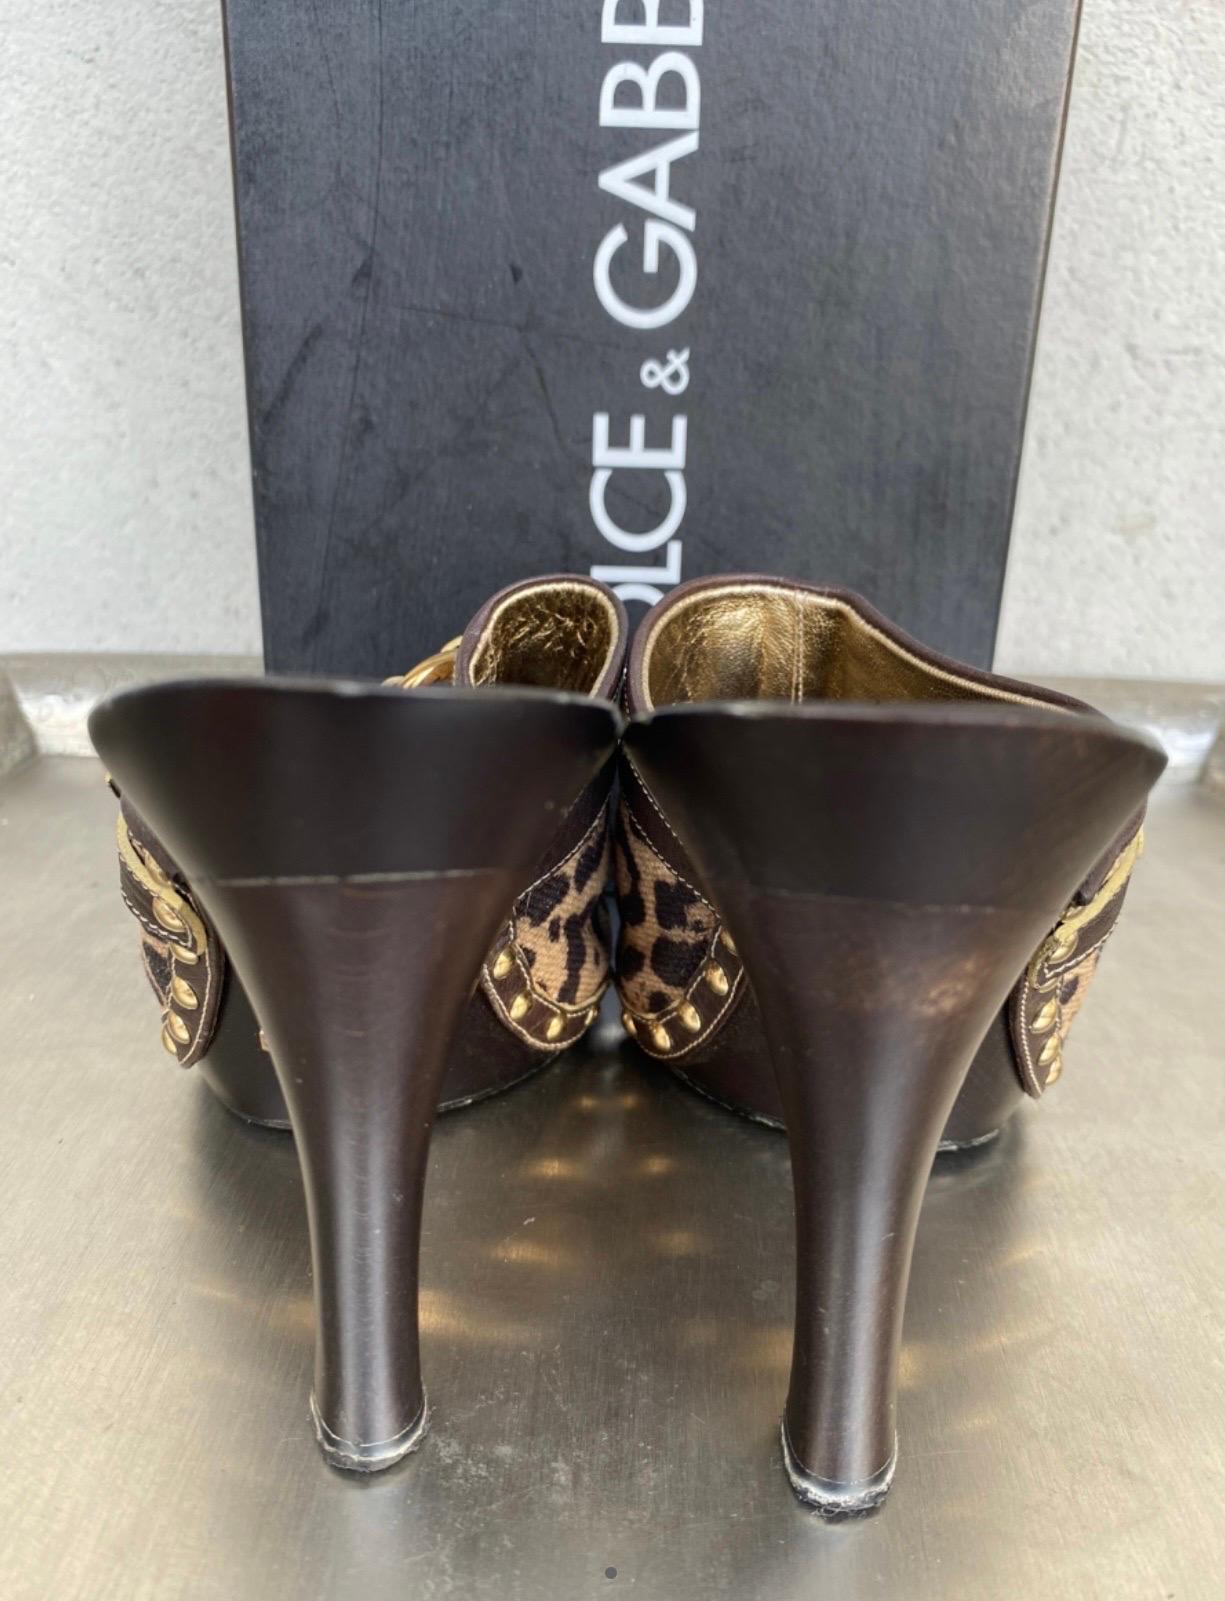 Dolce & Gabbana sandals number 38, the upper part is in animal print fabric, the upper is in wood, 10 cm heel, 25 cm insole, in very good condition with box.